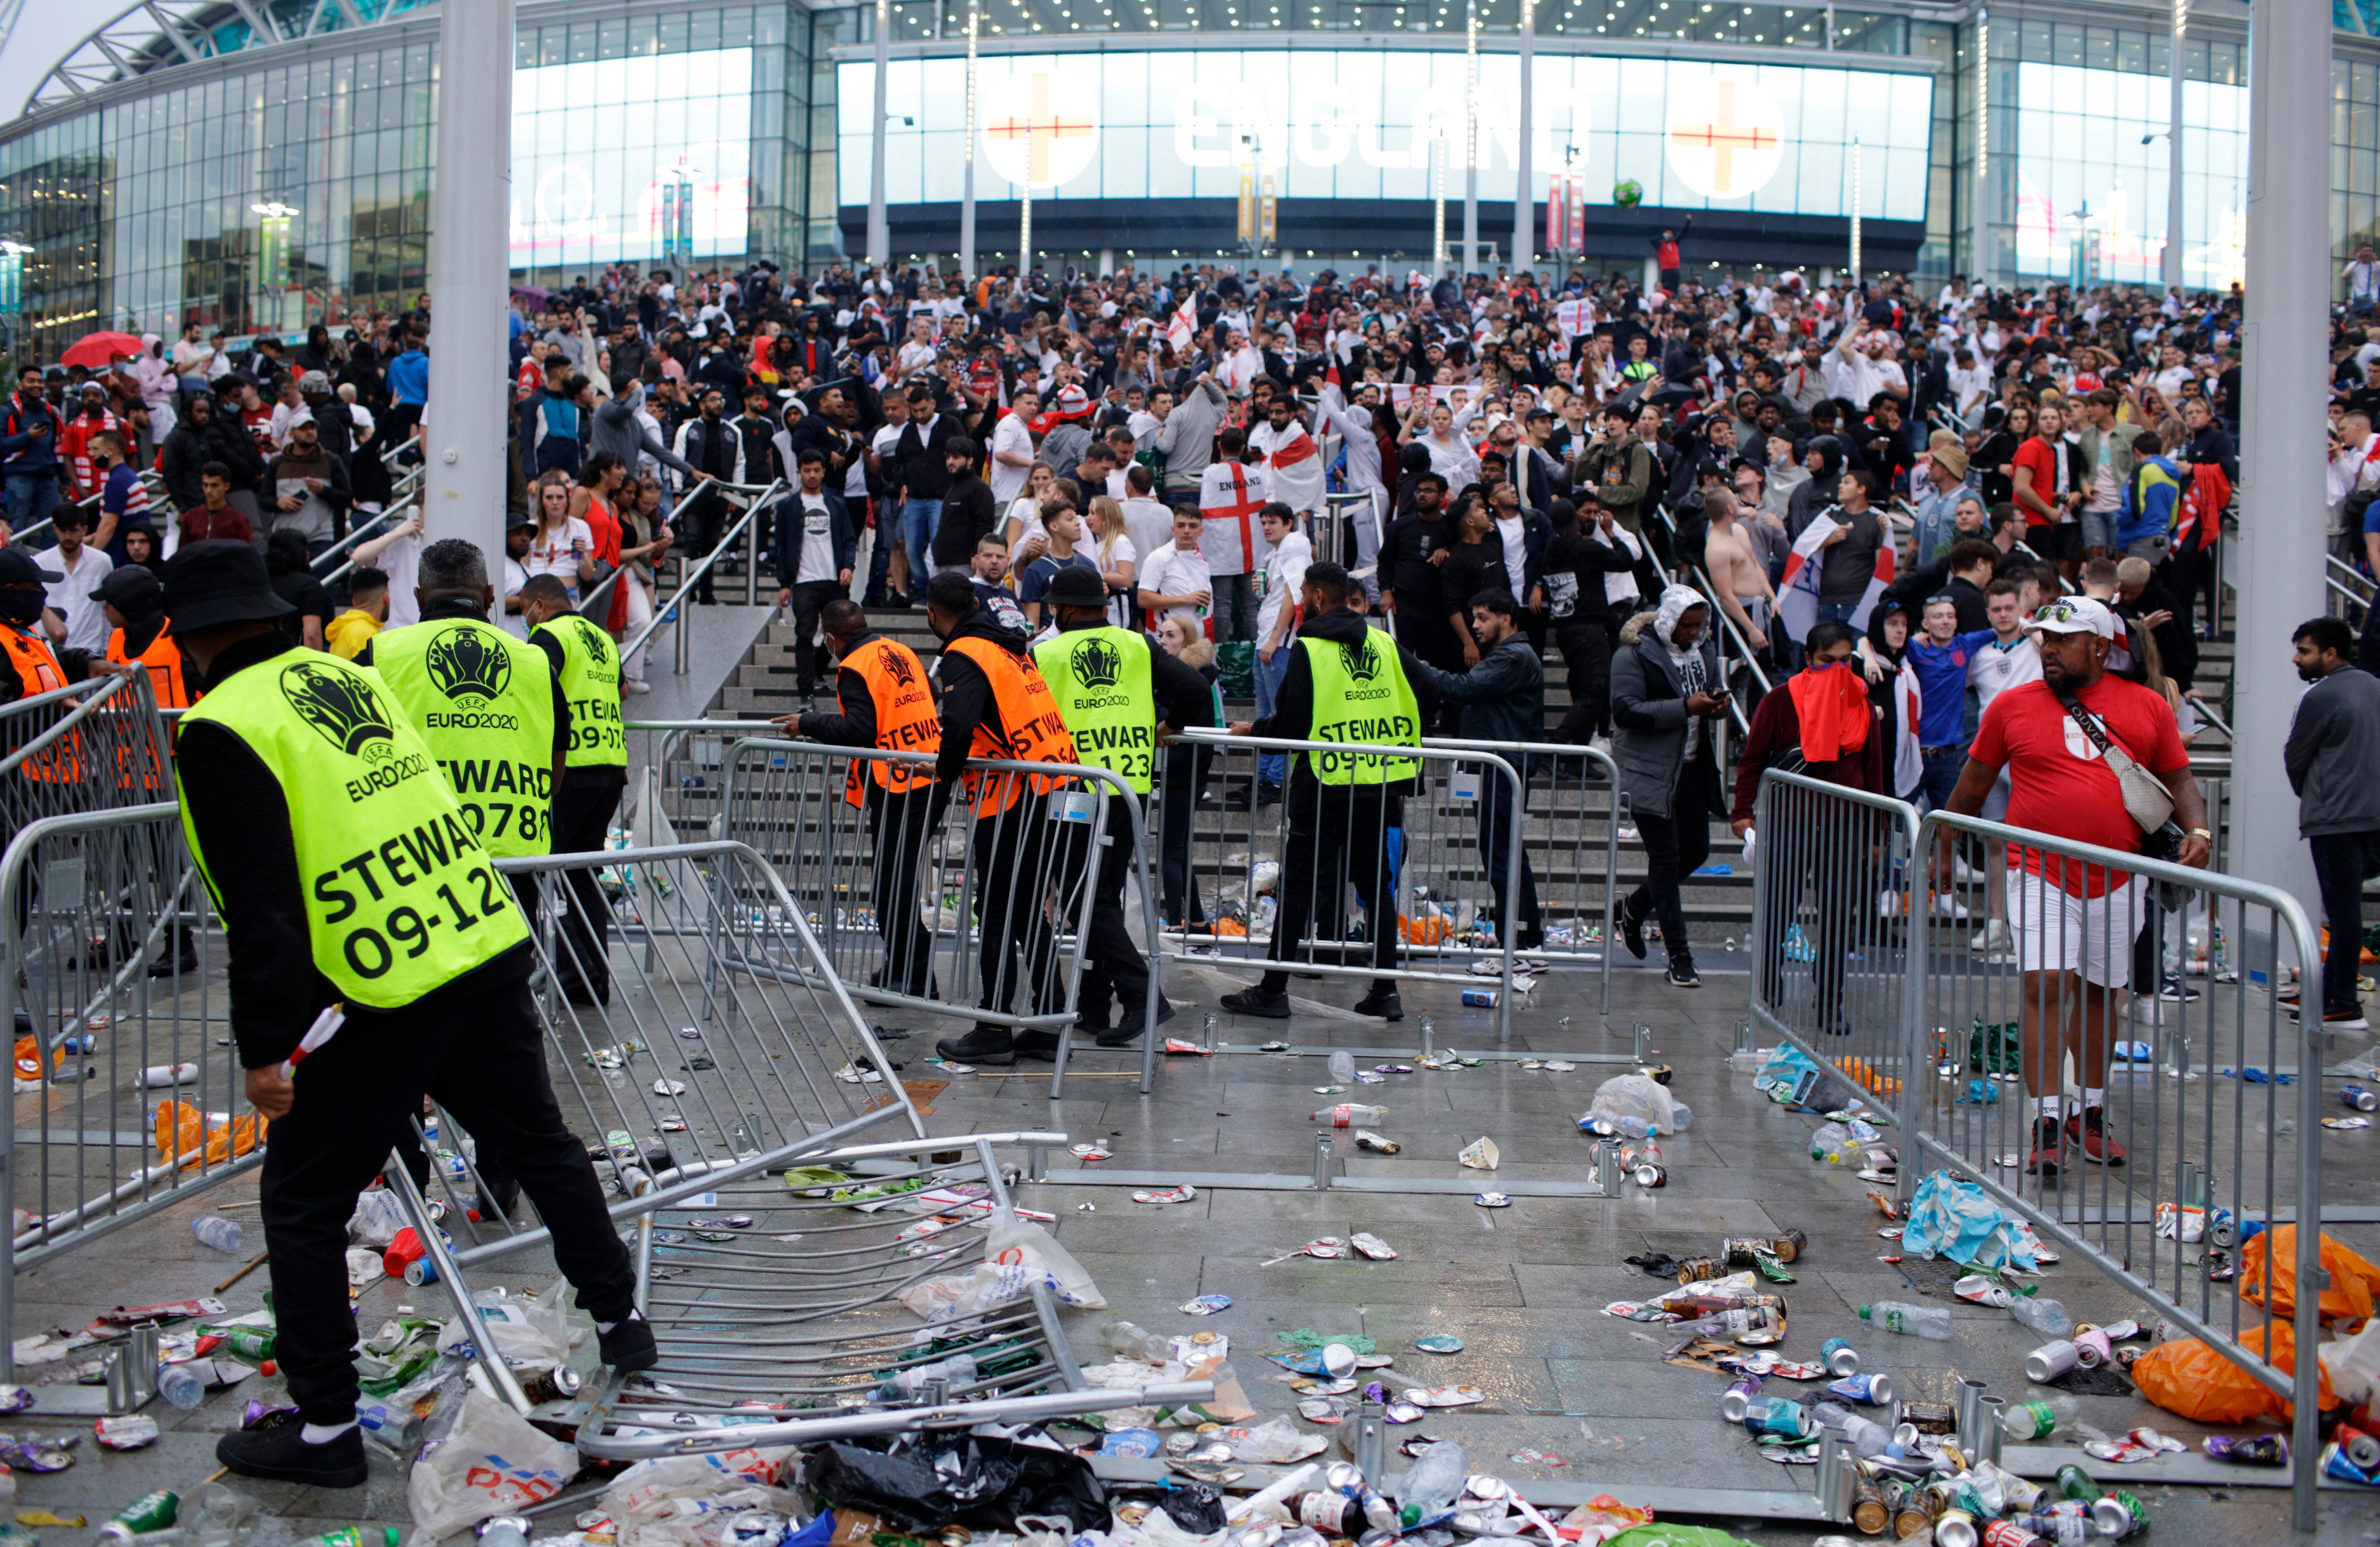 There was trouble at the Euro 2020 final at Wembley